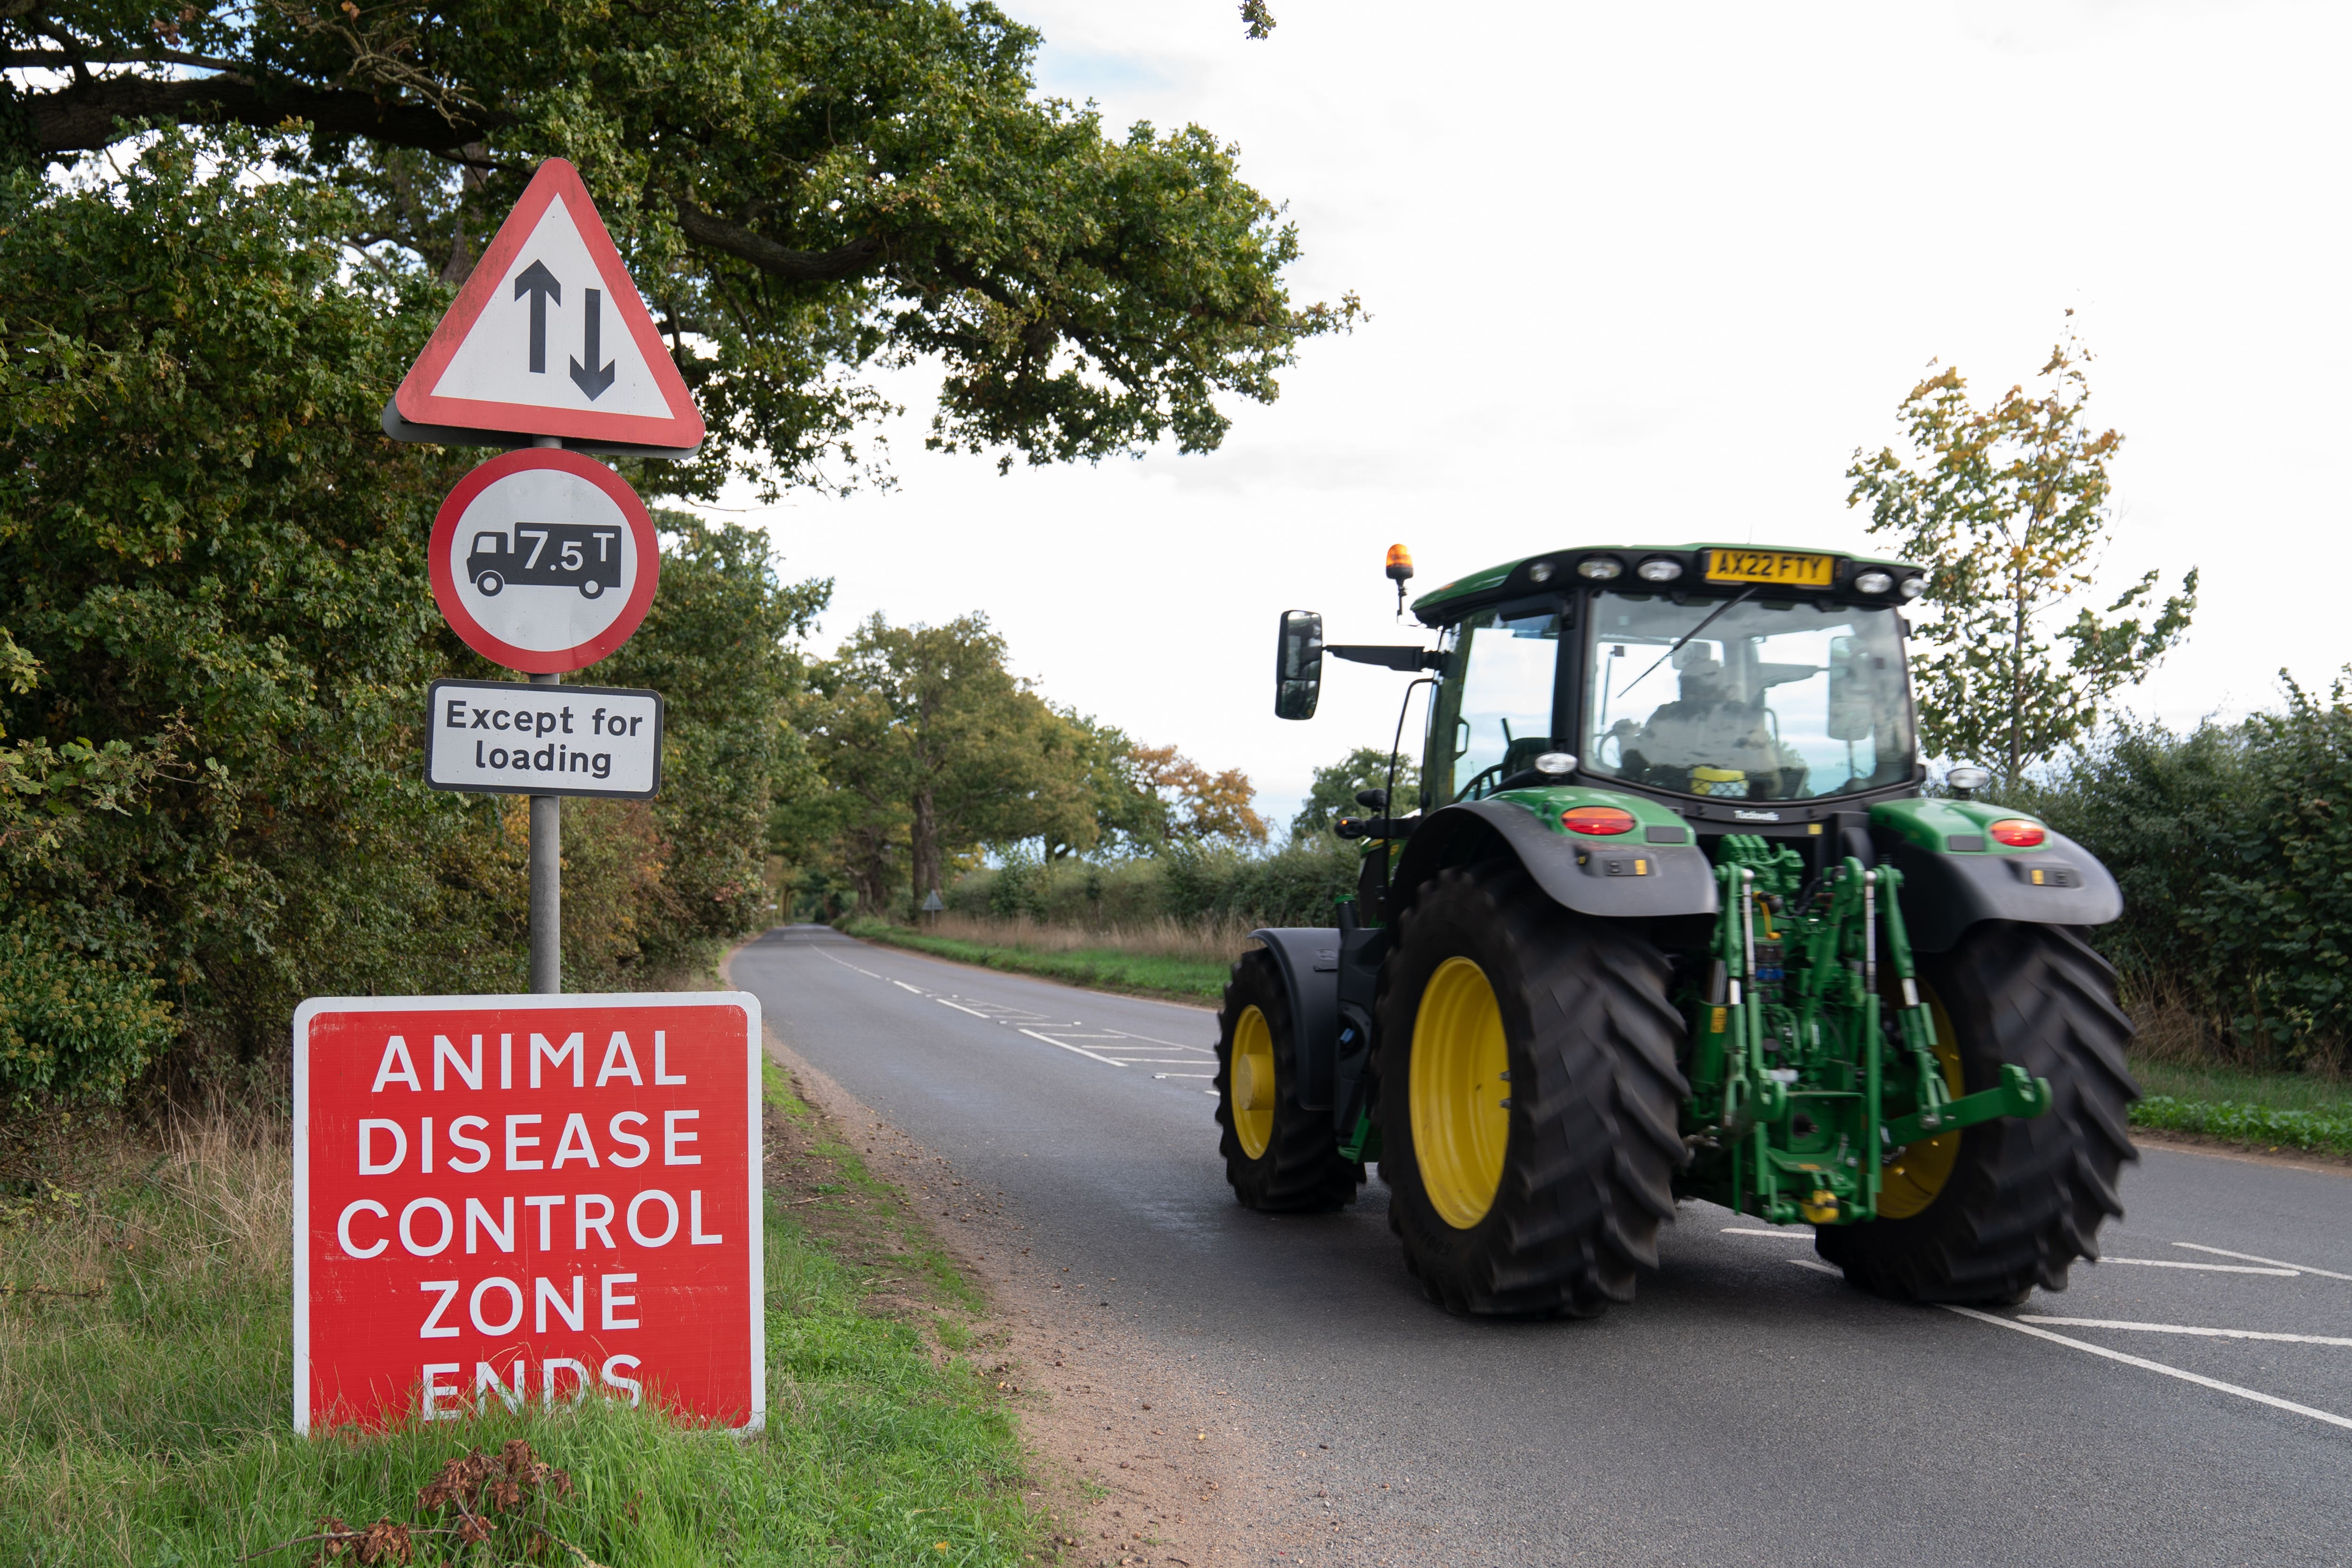 A tractor driving past a sign warning of an animal disease control zone (Joe Giddens/PA)